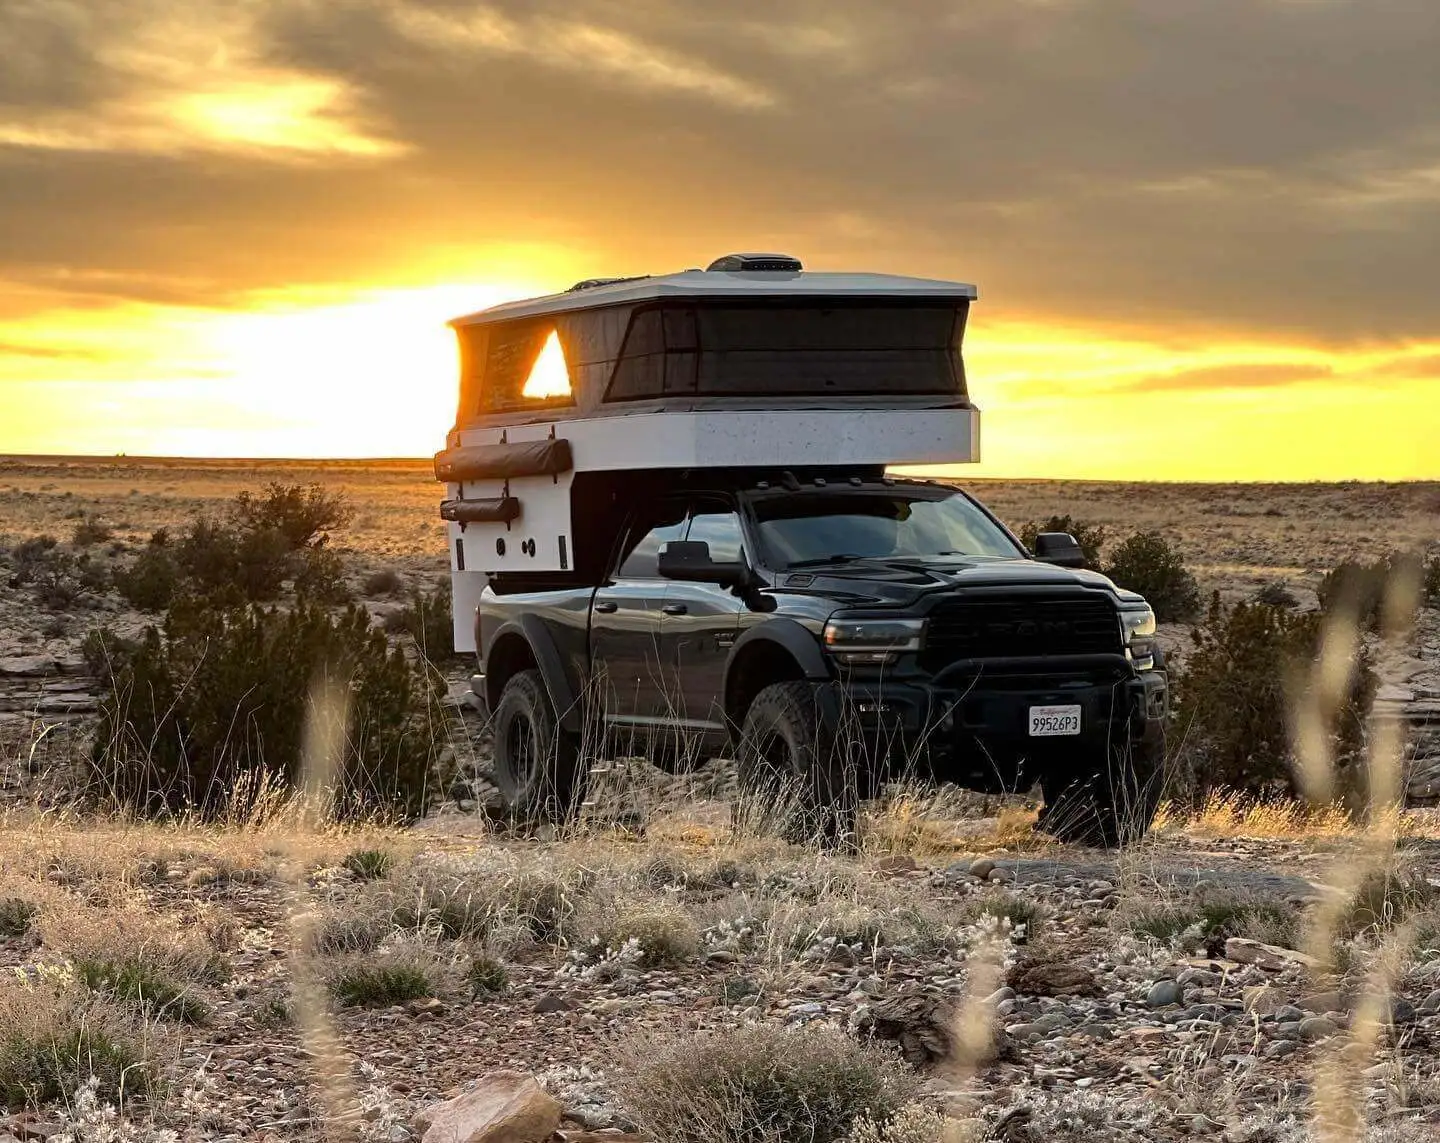 pop up truck camper on a black truck in a dessert site with sunset view